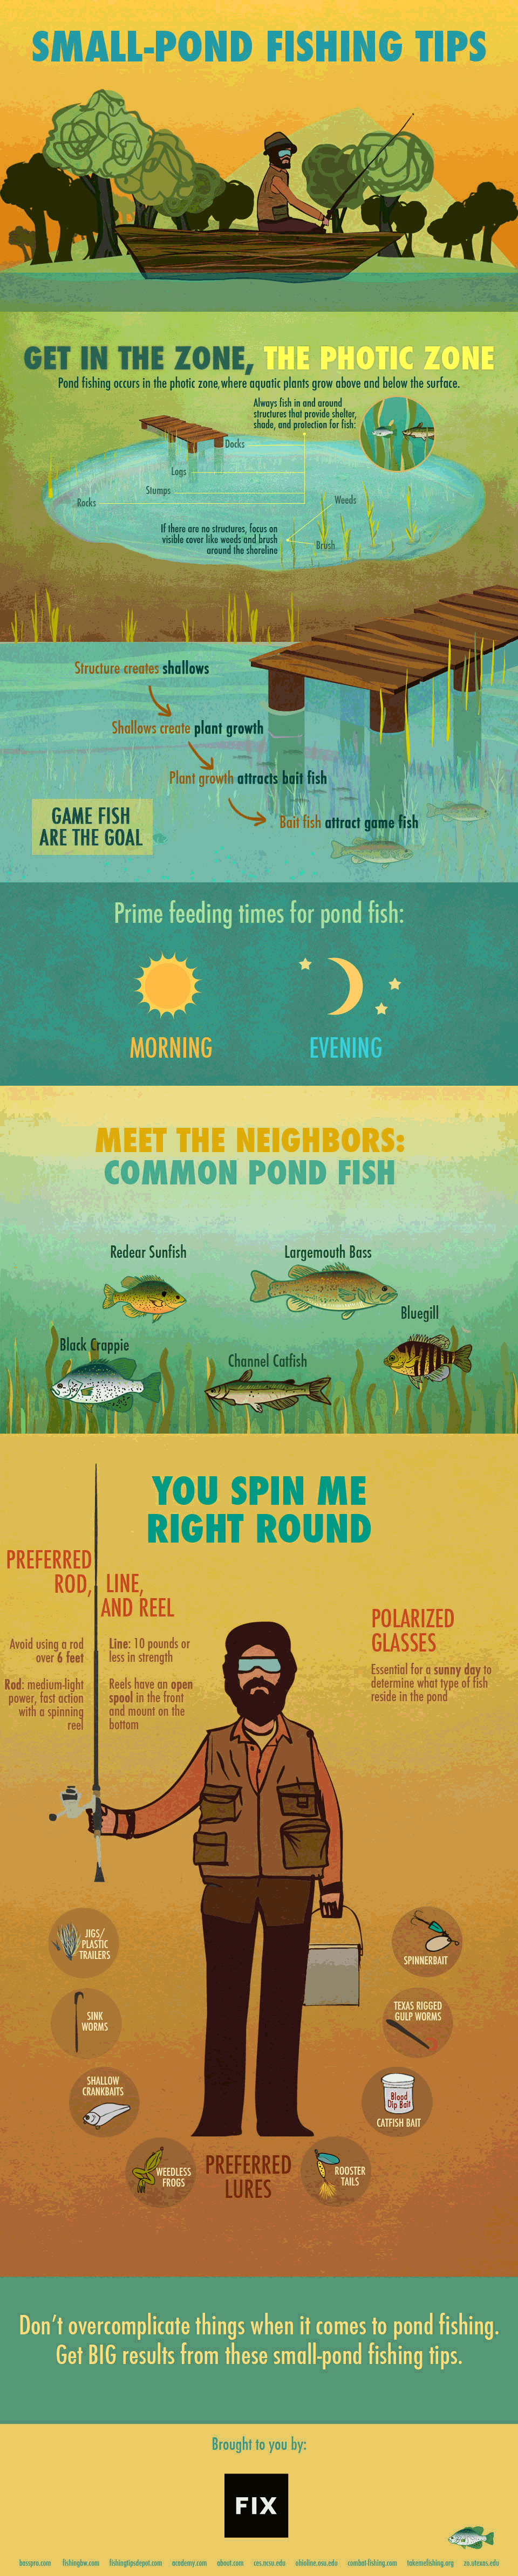 https://www.fix.com/assets/content/15279/small-pond-fishing-tips-final.png